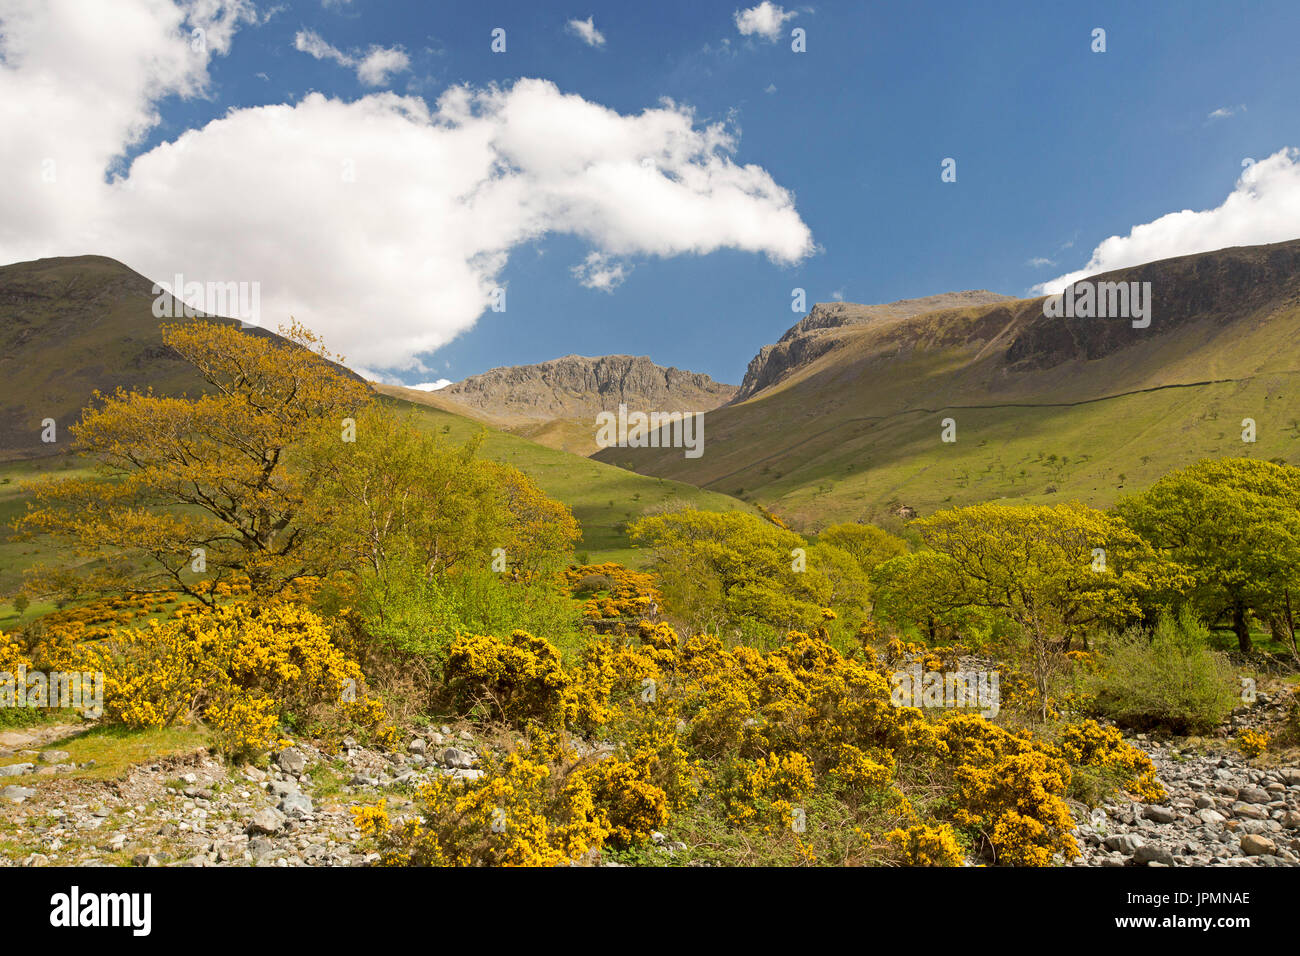 Landscape of treeless hills daubed with golden flowers of gorse & Scafell pike on horizon under blue sky in Lake District national park, England Stock Photo